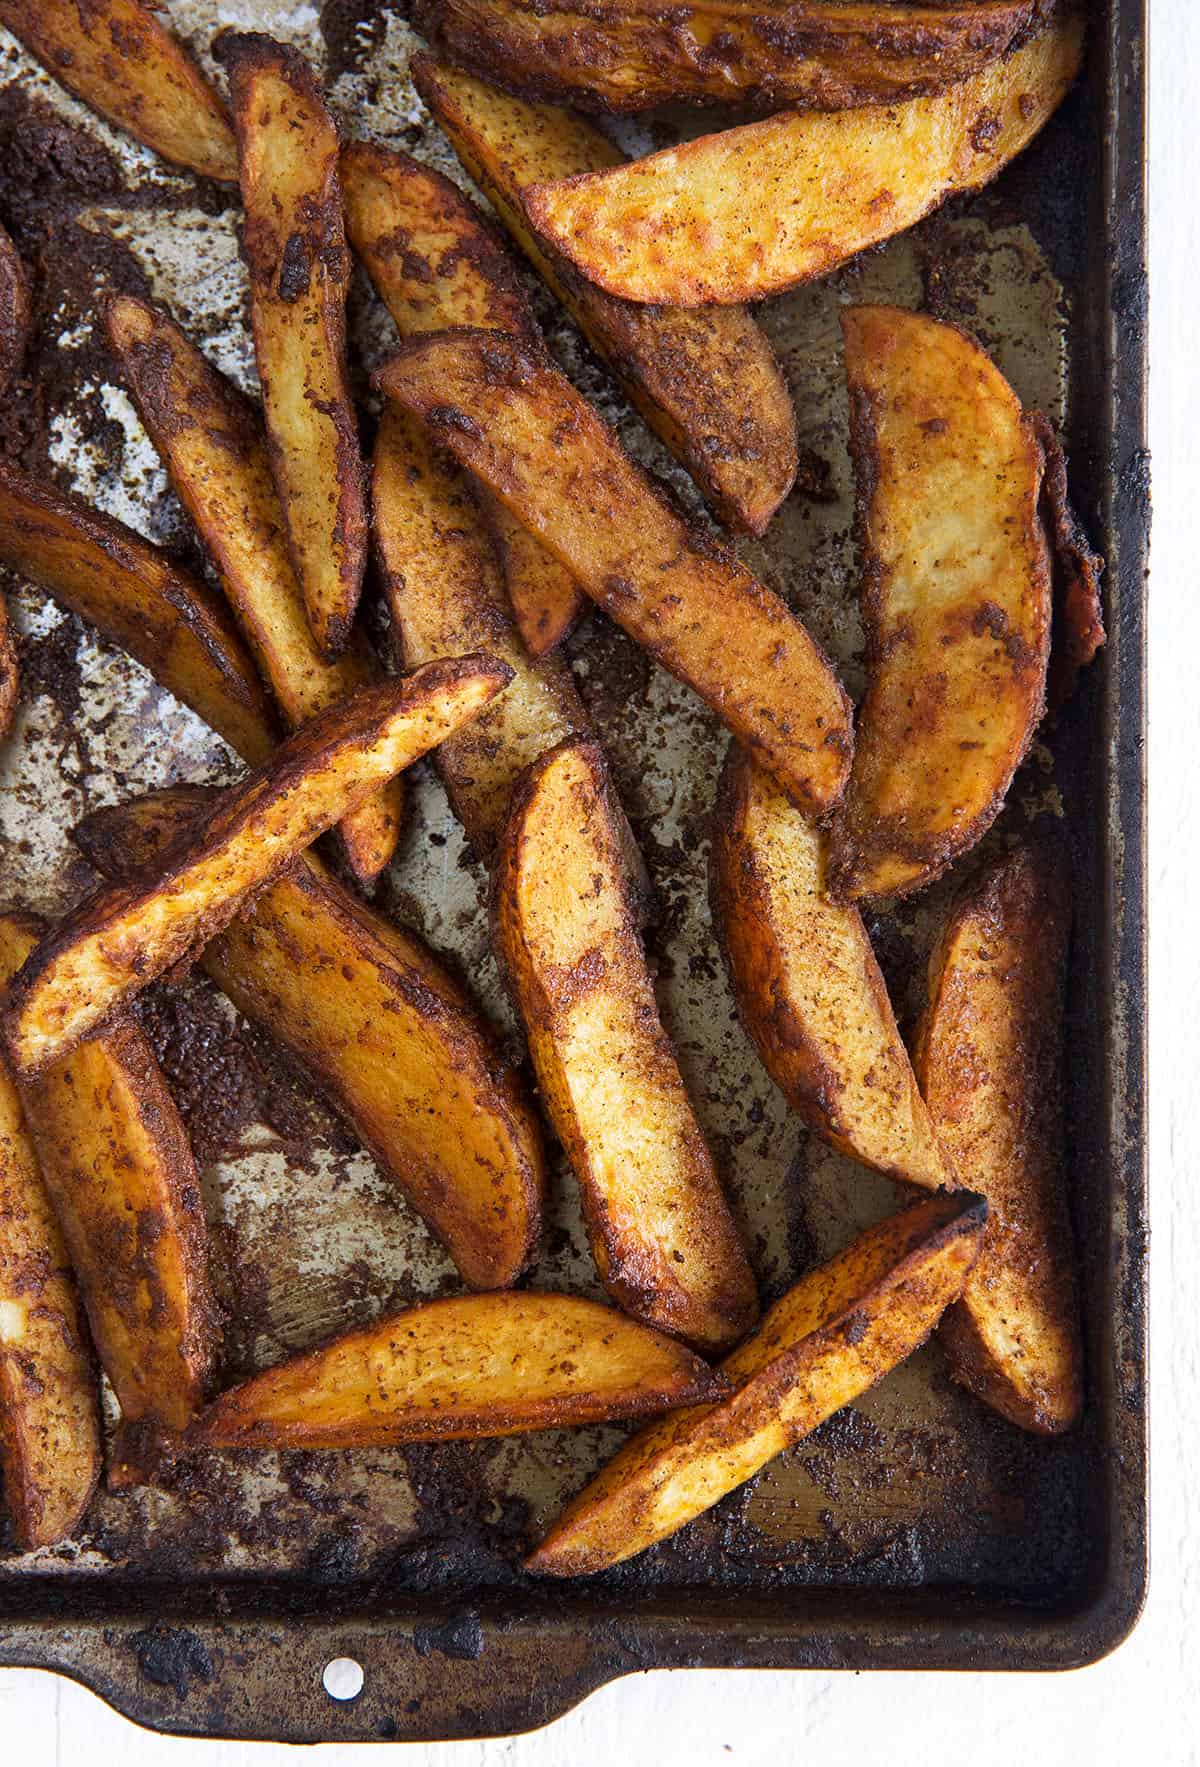 Cooked fries are spread out on a baking sheet.